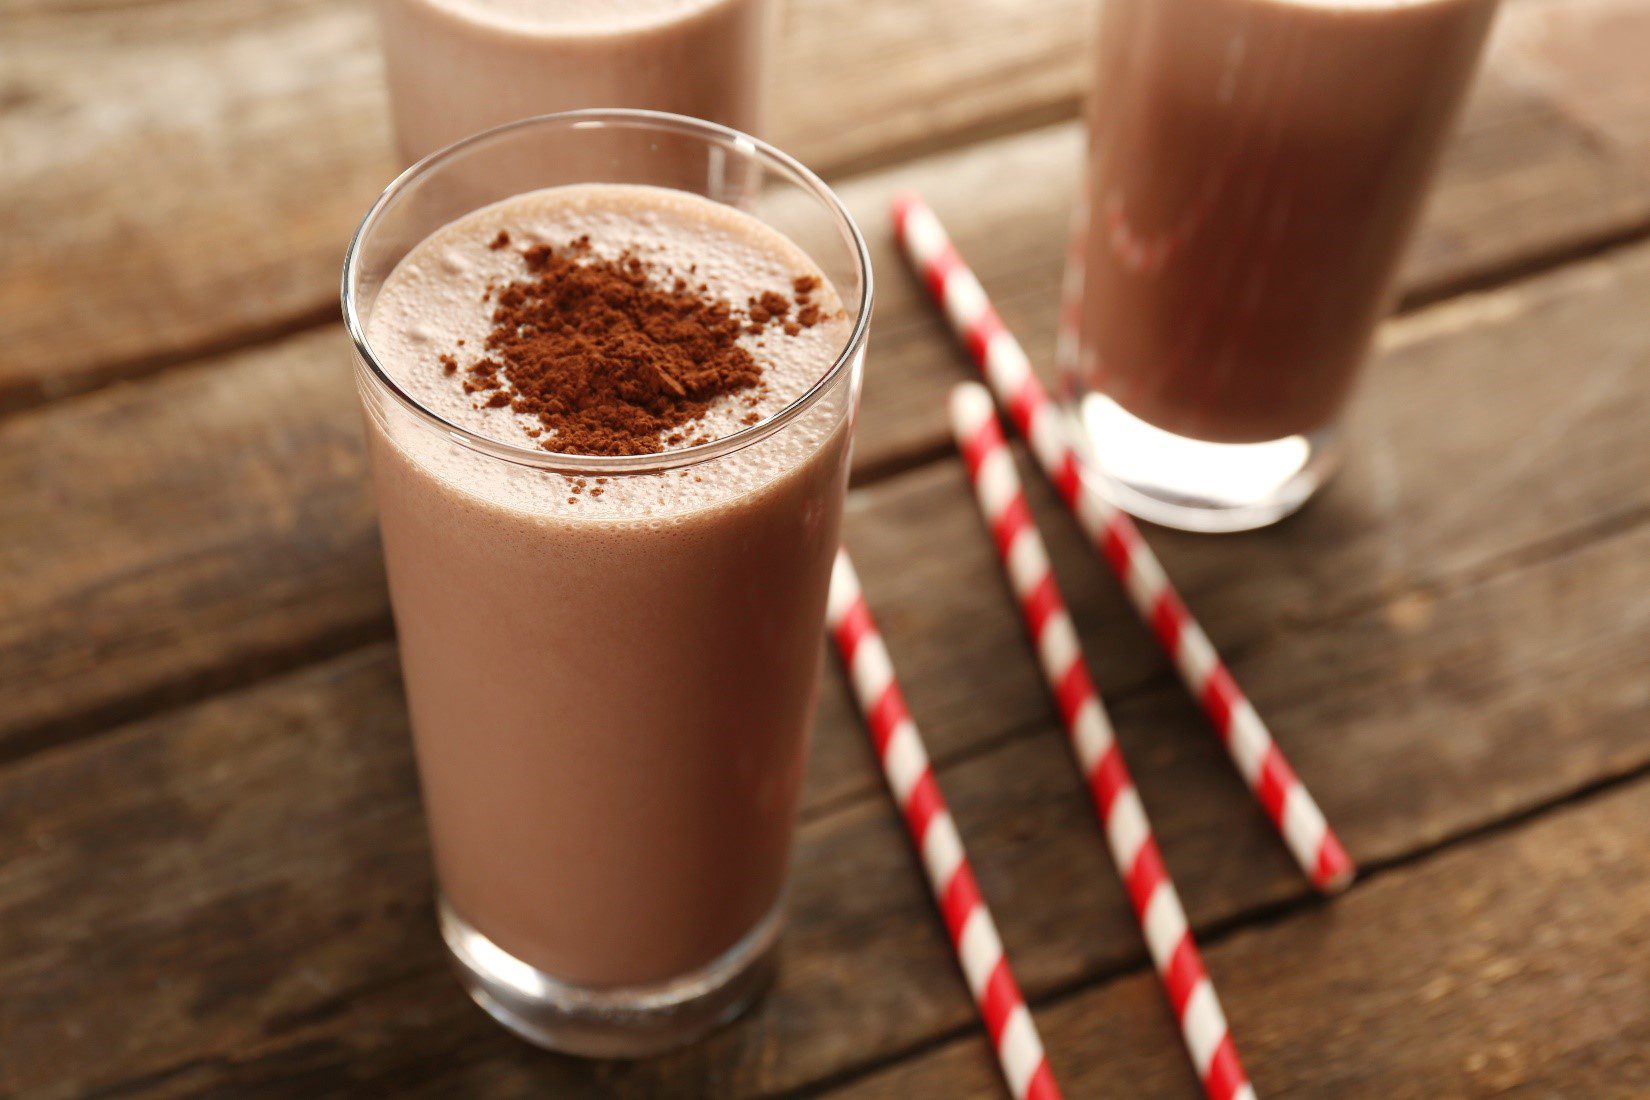 Chocolate lactose free milkshake in glass with cocoa and straws.